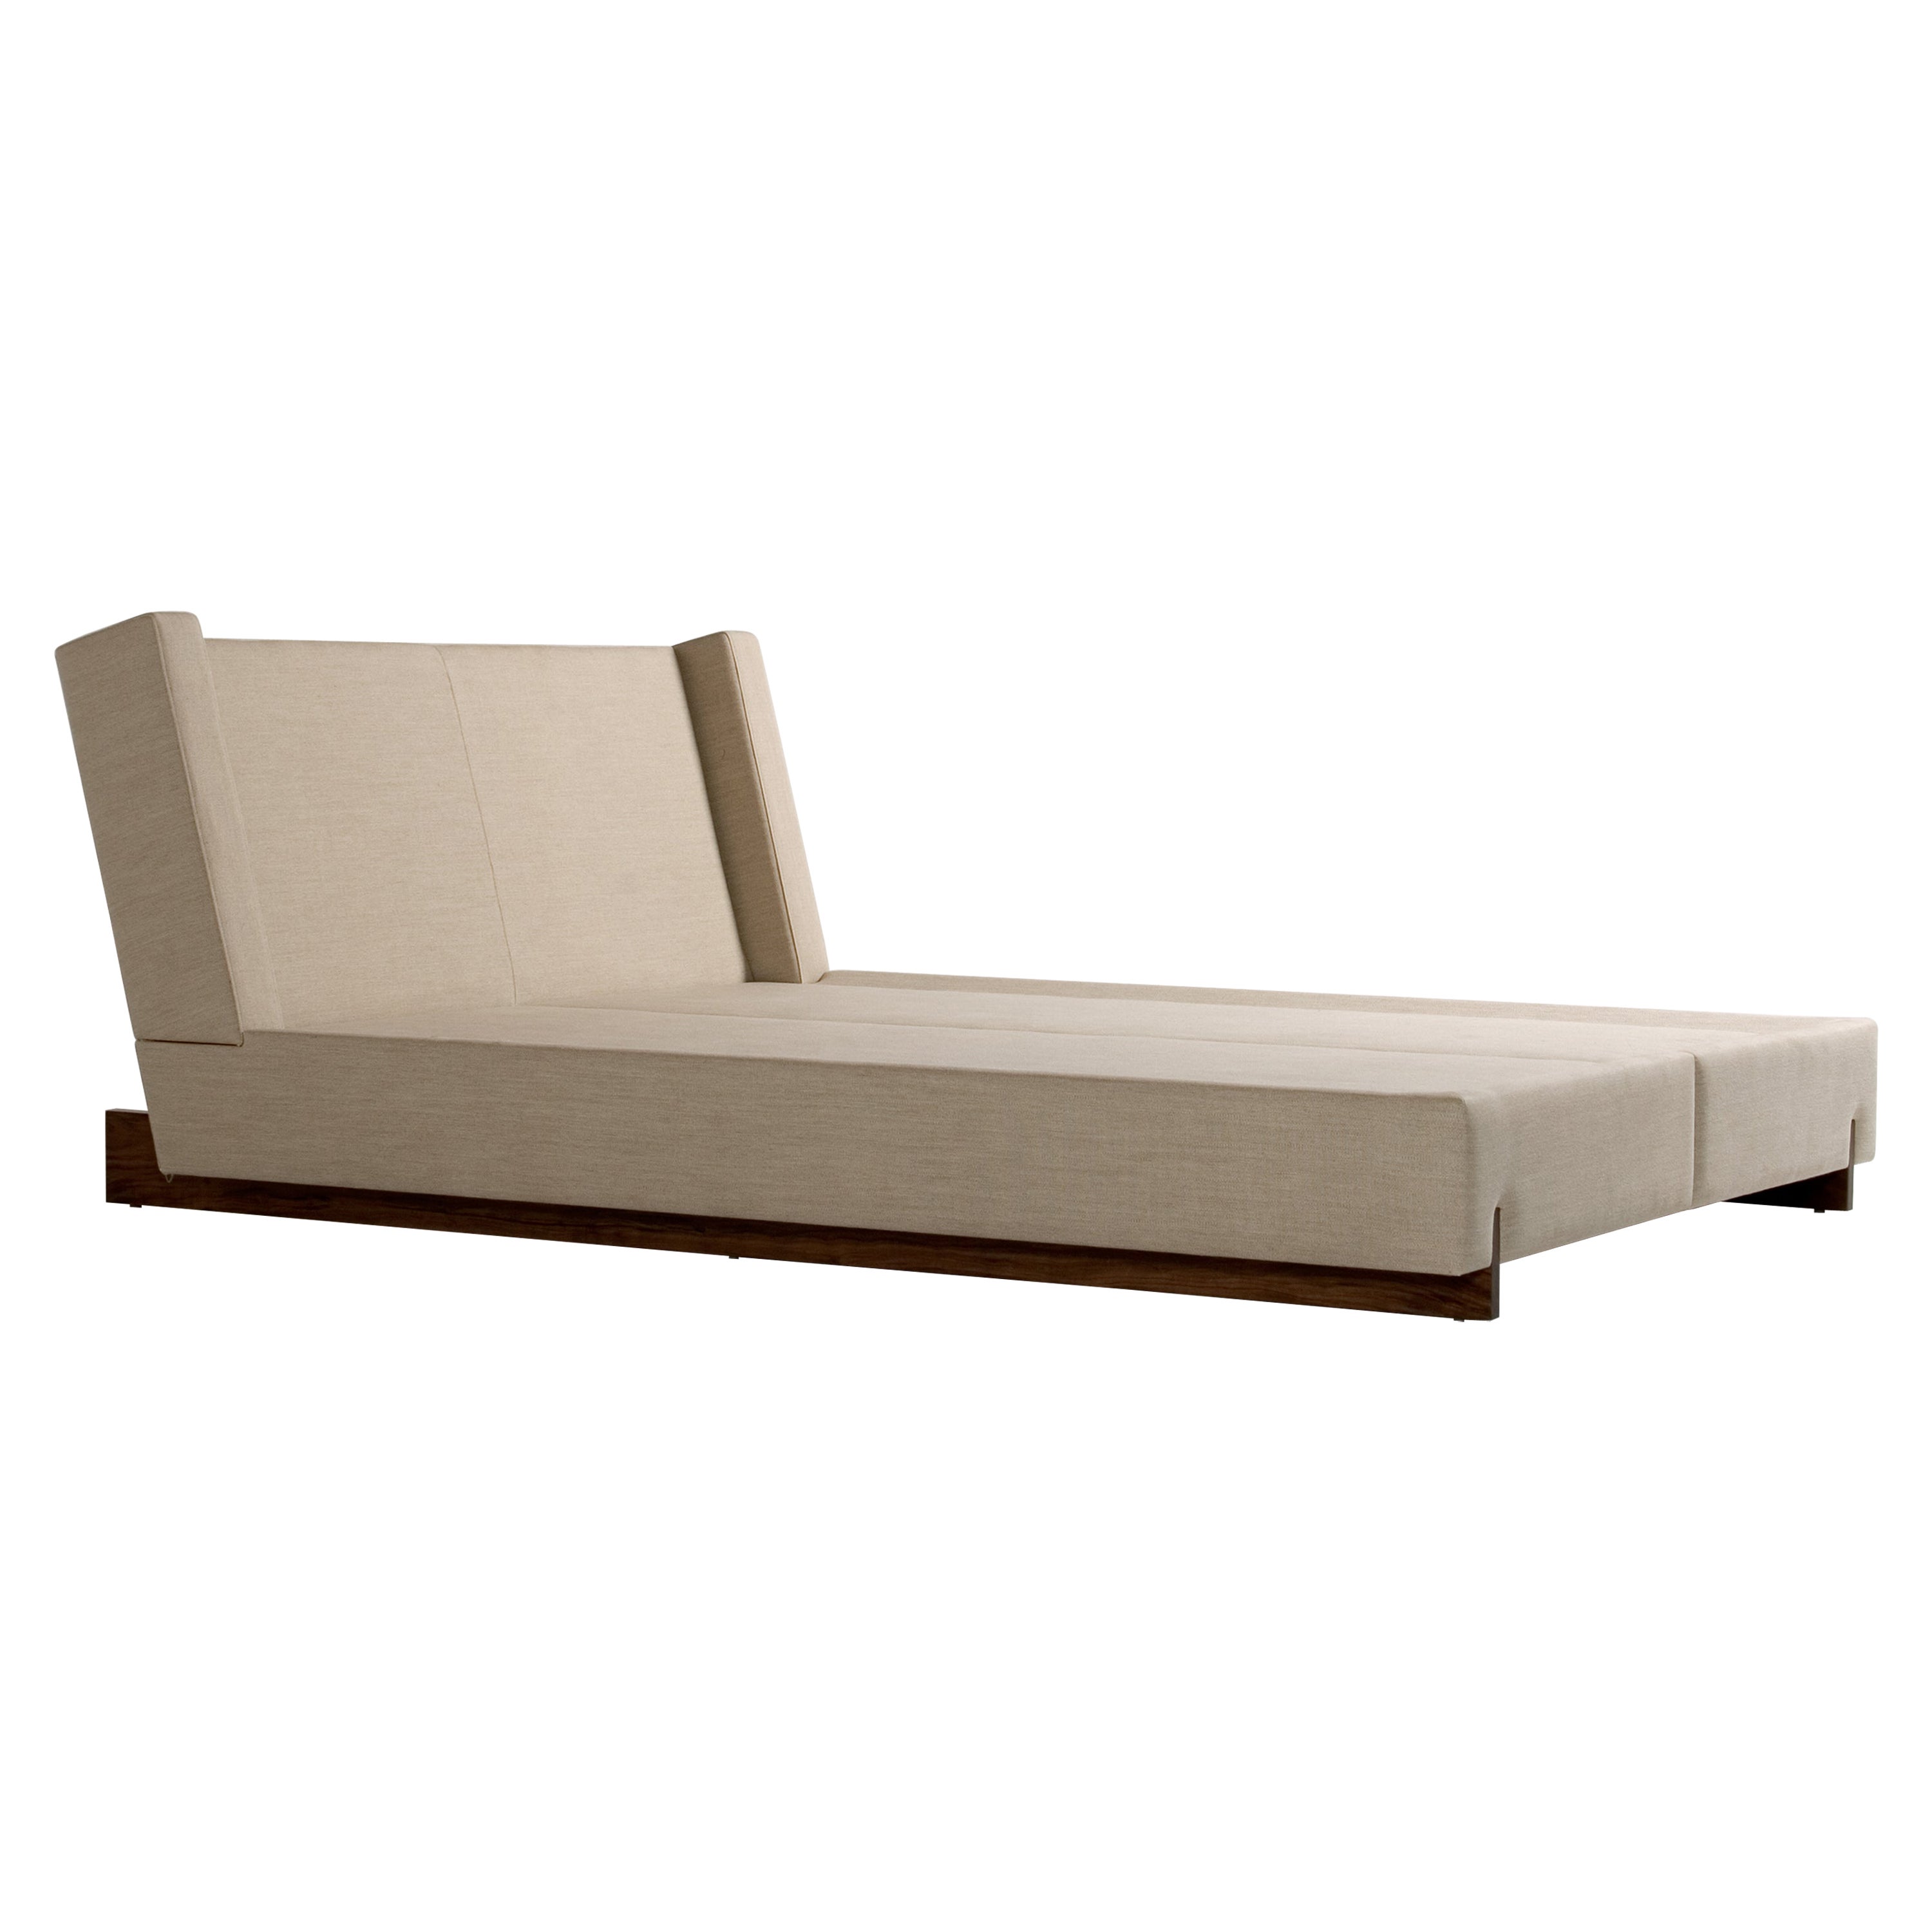 Trax Cali King Bed by Phase Design